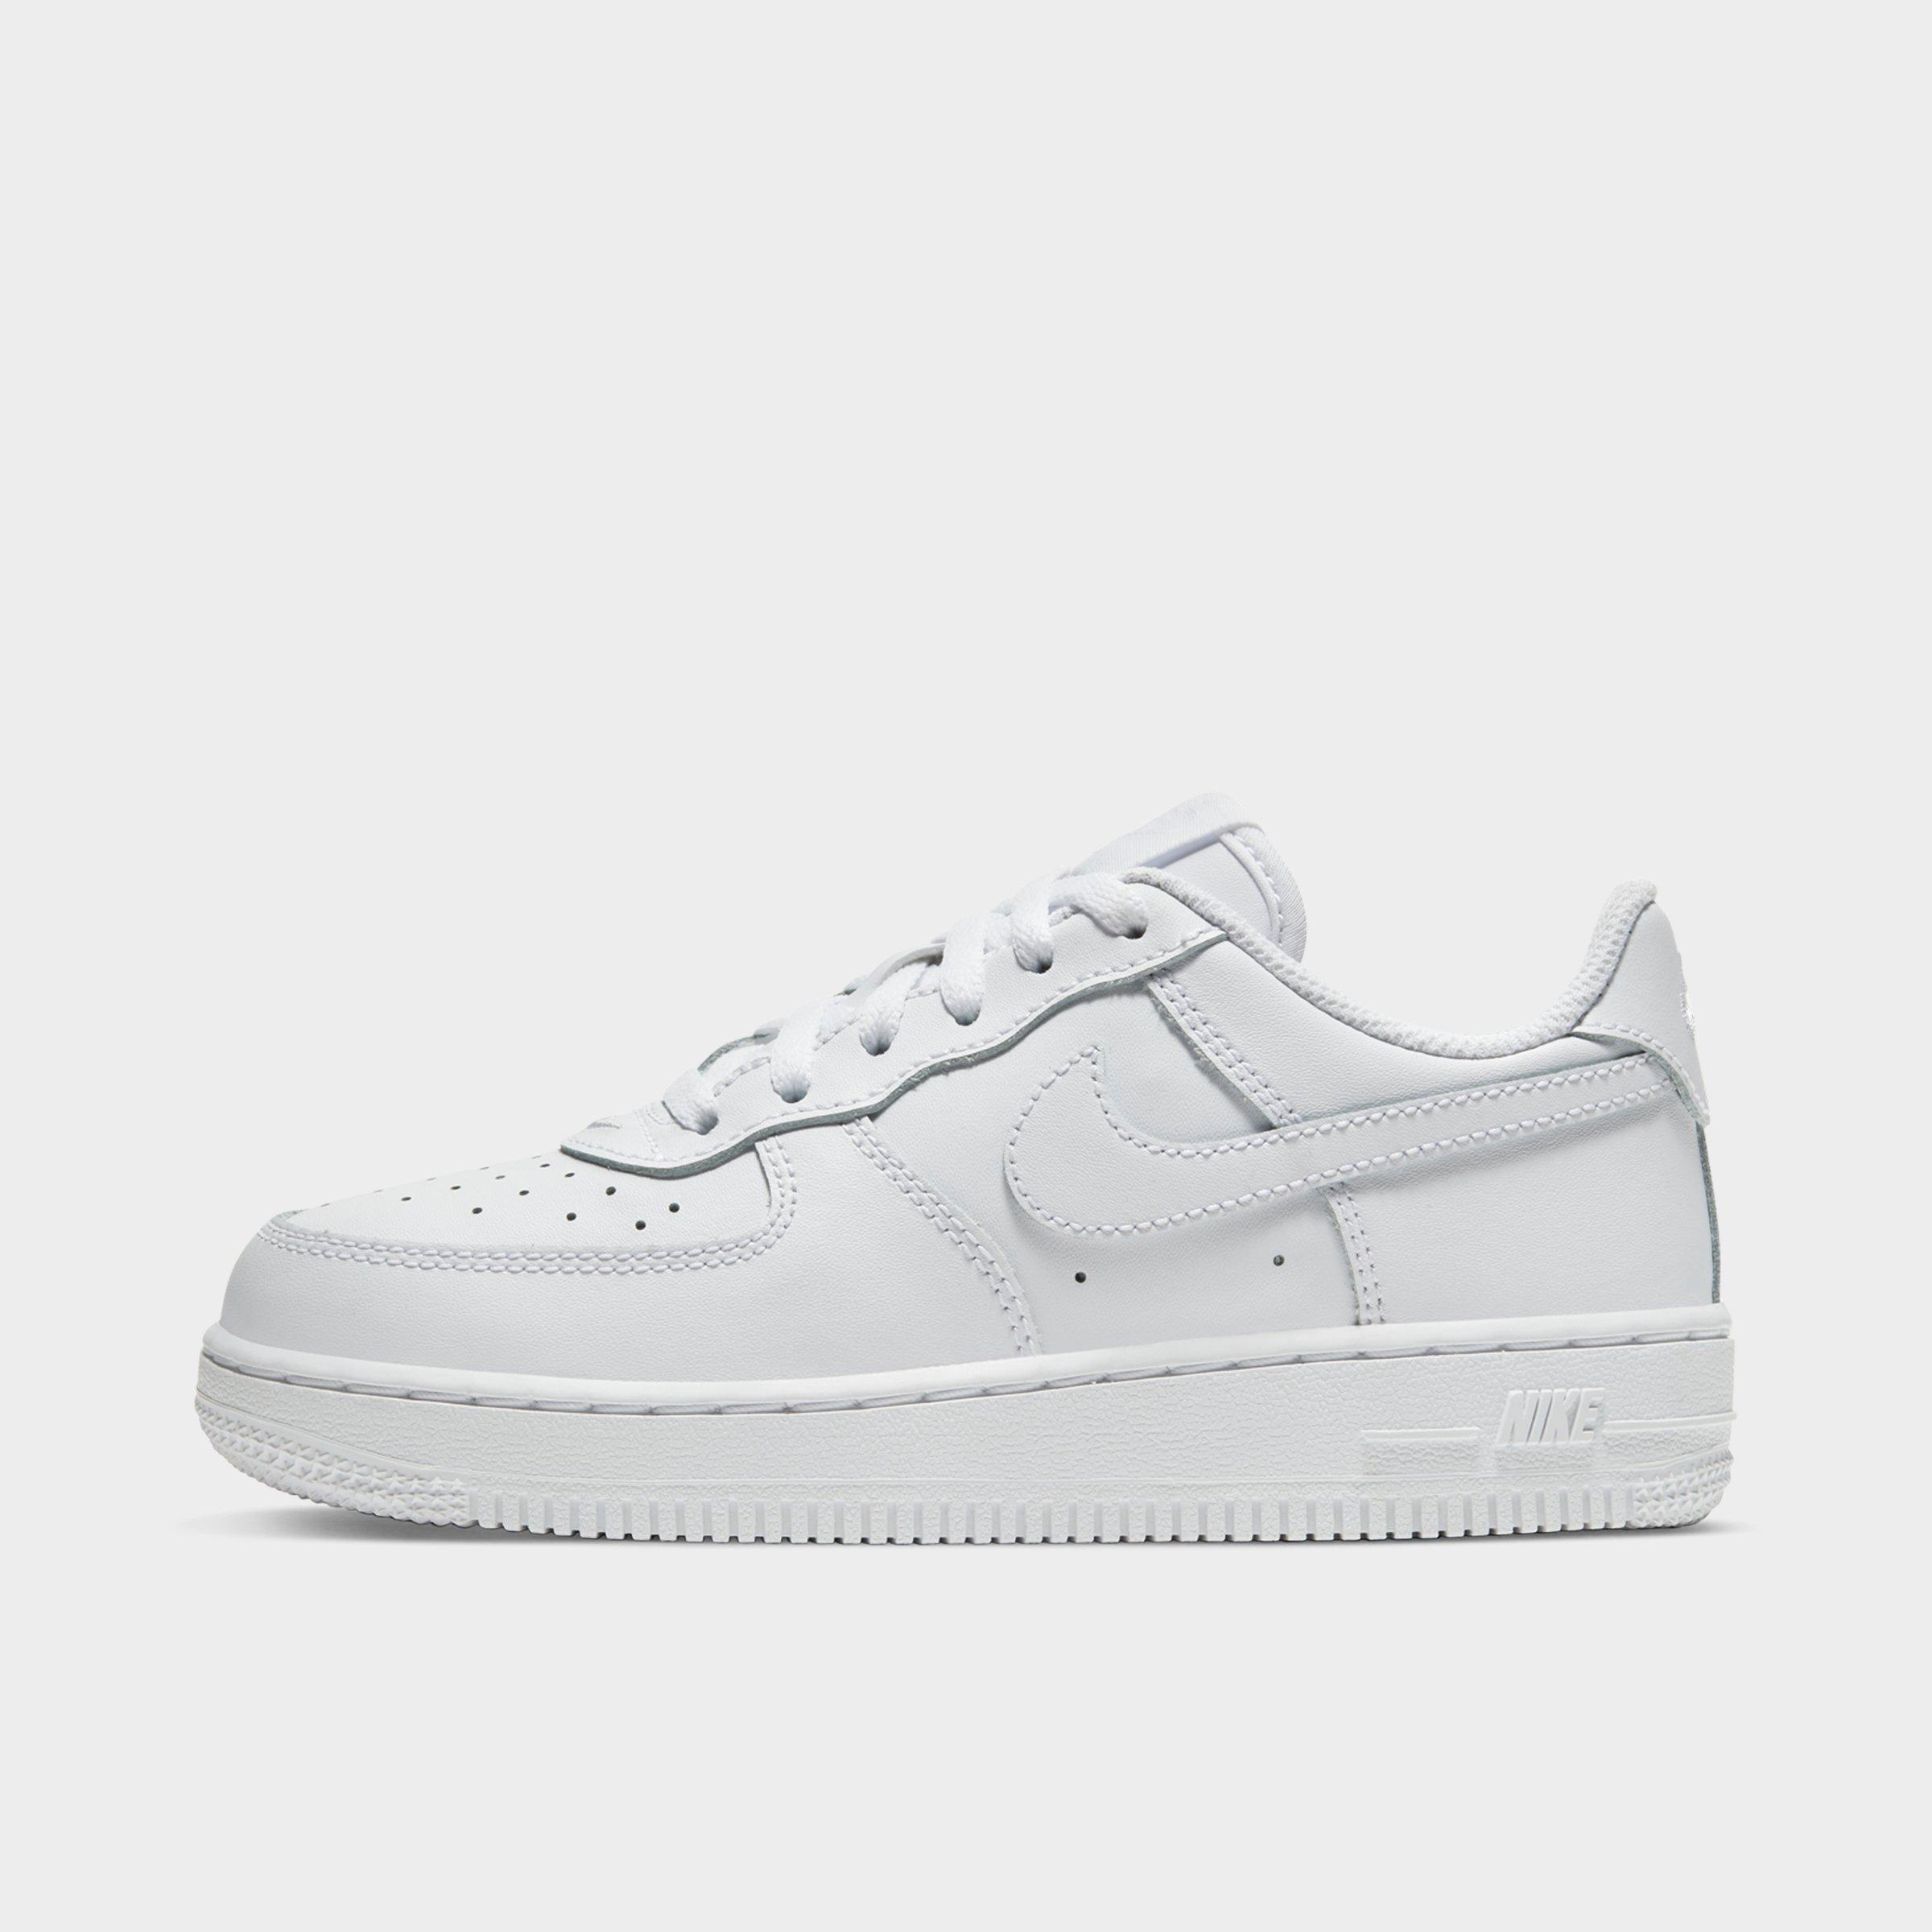 air force ones kids size